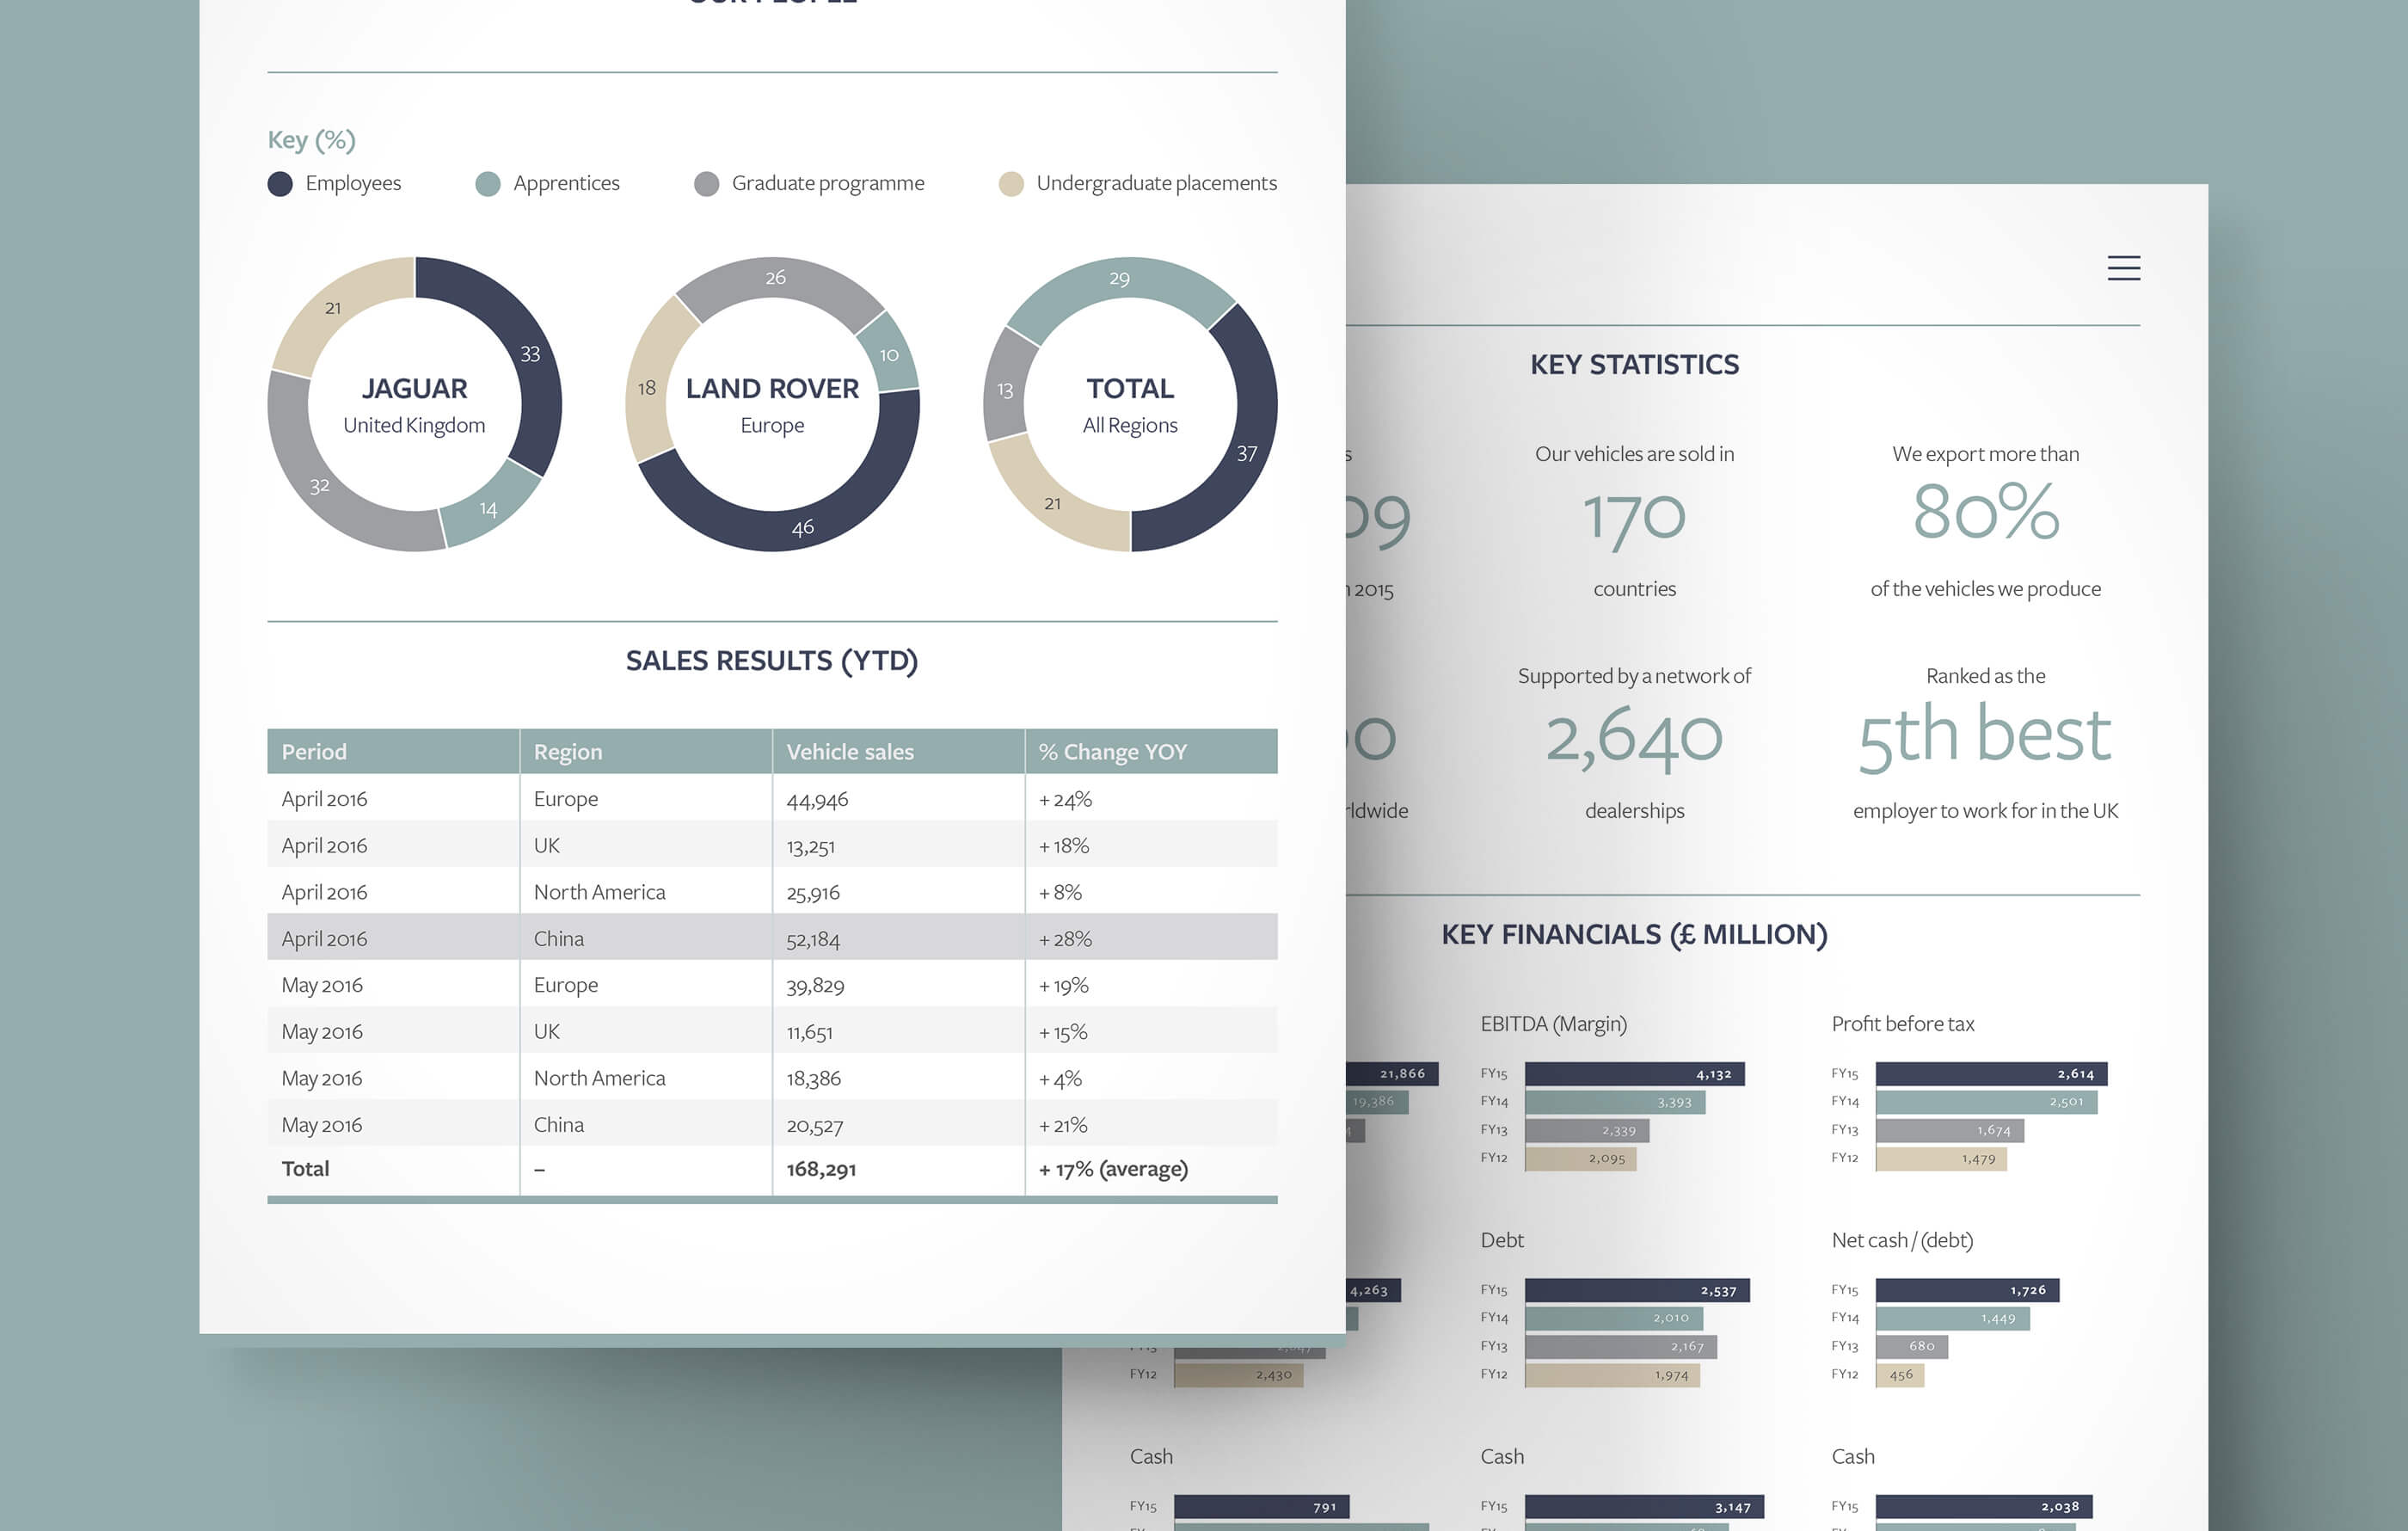 User interface design of JLR's sales results, overlapping bar charts of their key financial data